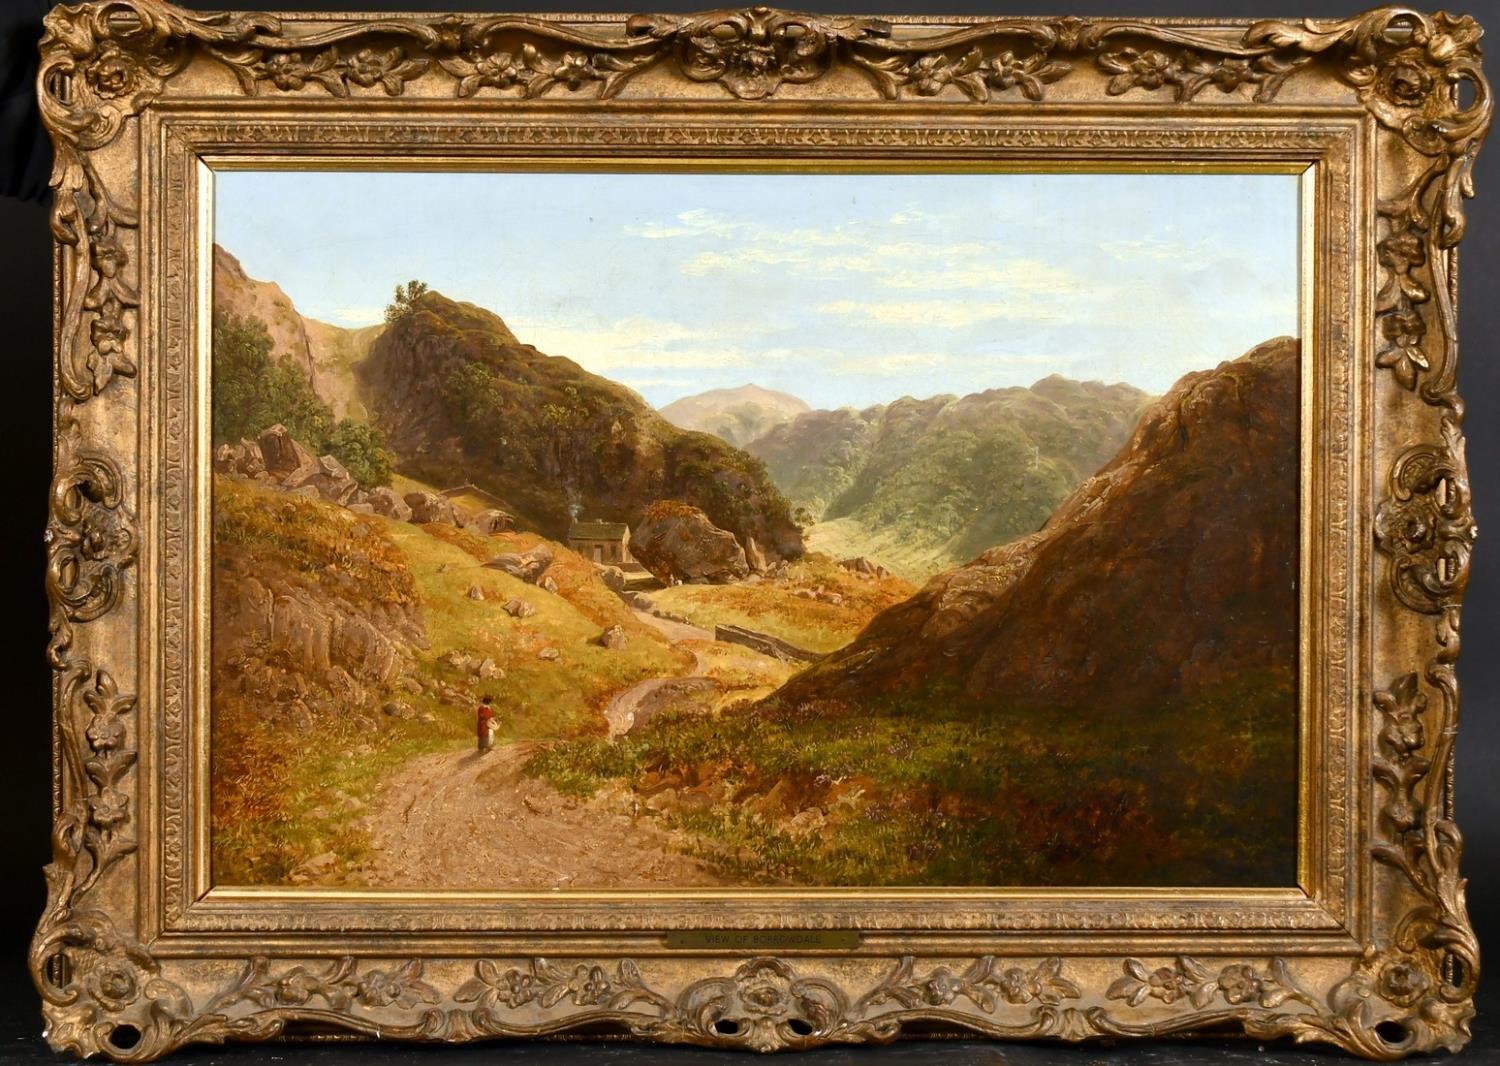 FINE VICTORIAN OIL PAINTING - BORROWDALE LAKE DISTRICT LANDSCAPE VALLEY FIGURE - Painting by (Circle of) David Cox